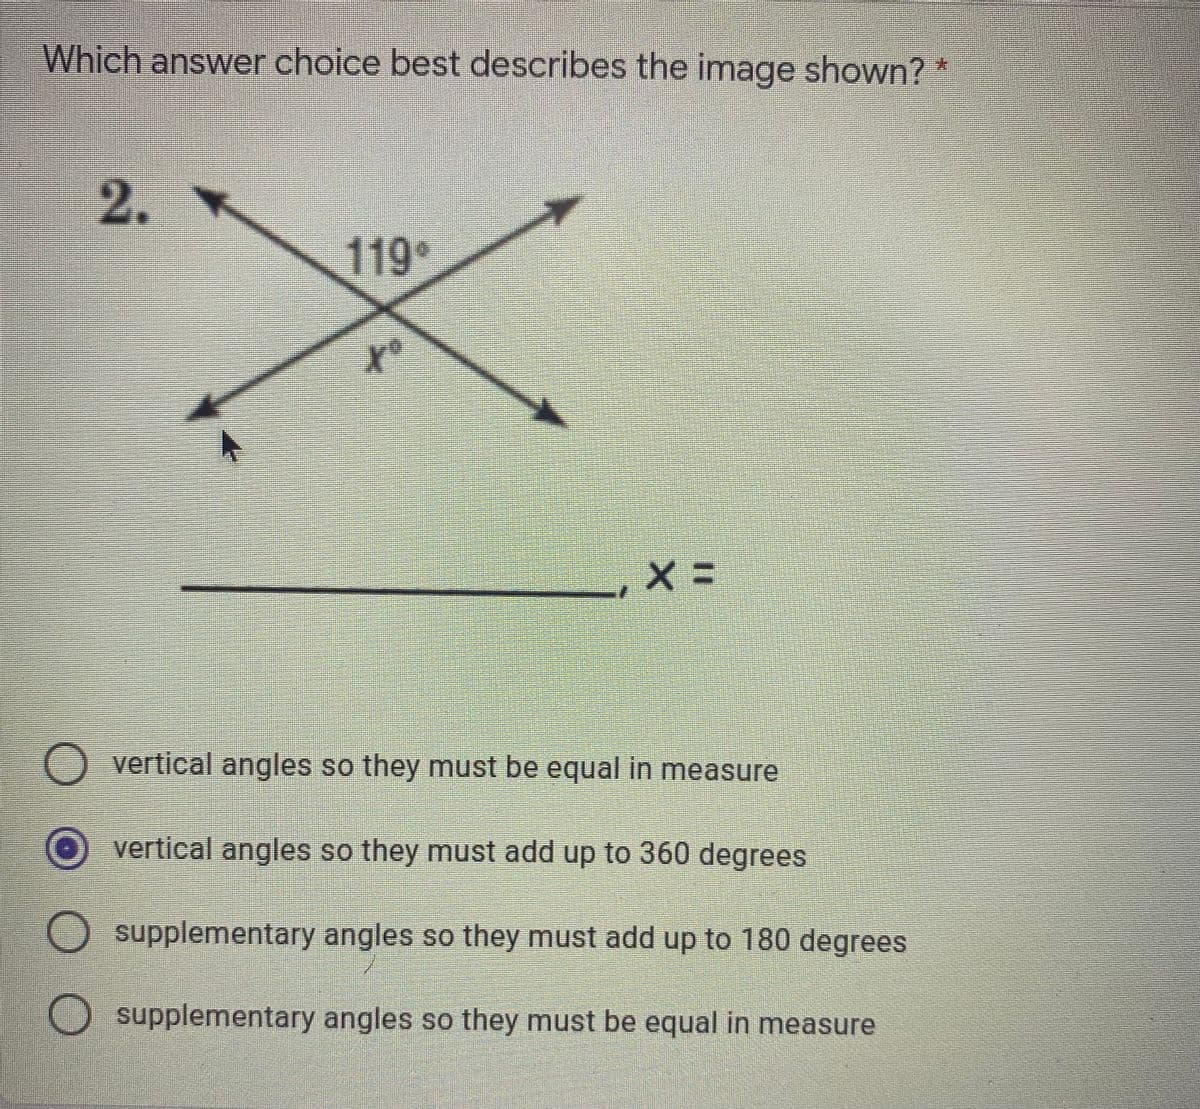 Which answer choice best describes the image shown? *
2.
119°
of
vertical angles so they must be equal in measure
vertical angles so they must add up to 360 degrees
O supplementary angles so they must add up to 180 degrees
supplementary angles so they must be equal in measure
